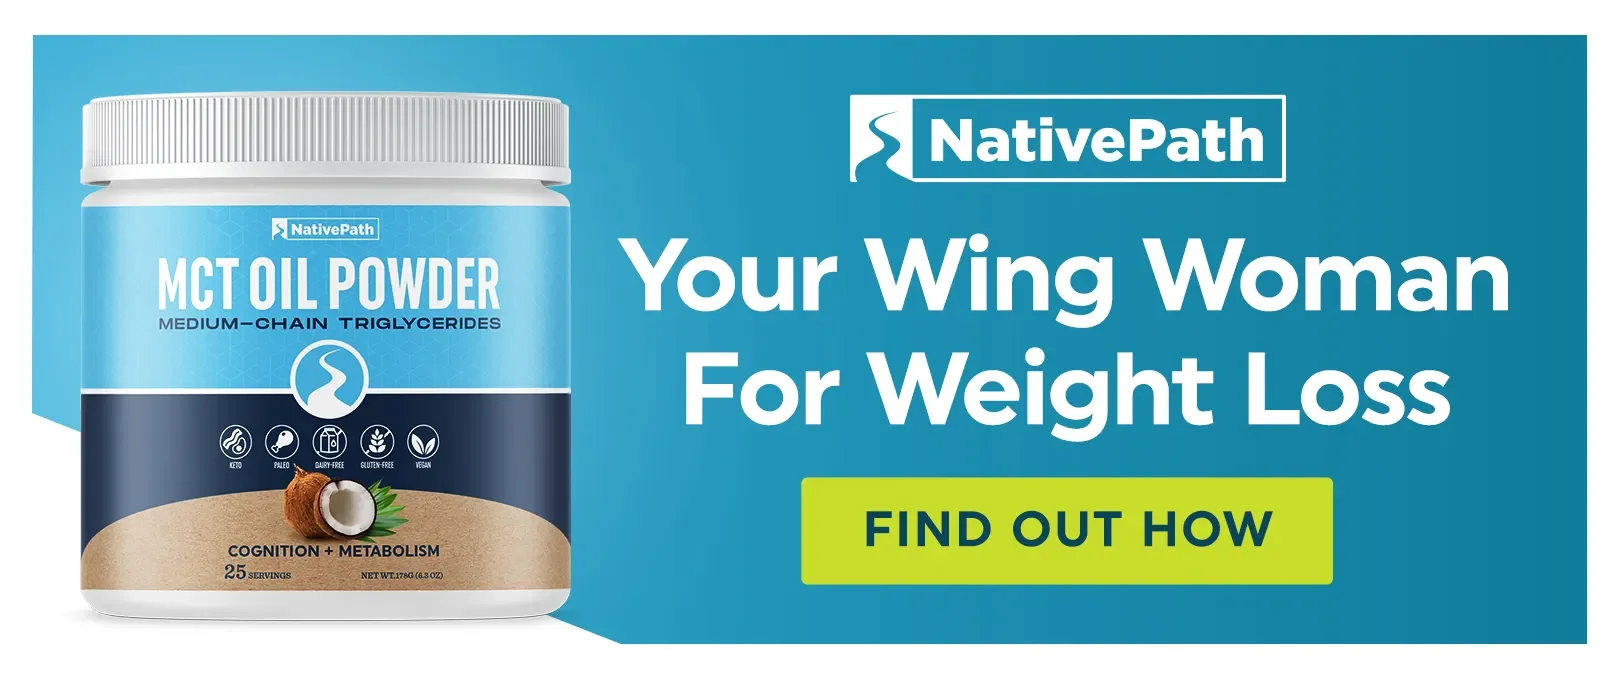 NativePath MCT Powder: Your Wing Woman for Weight Loss